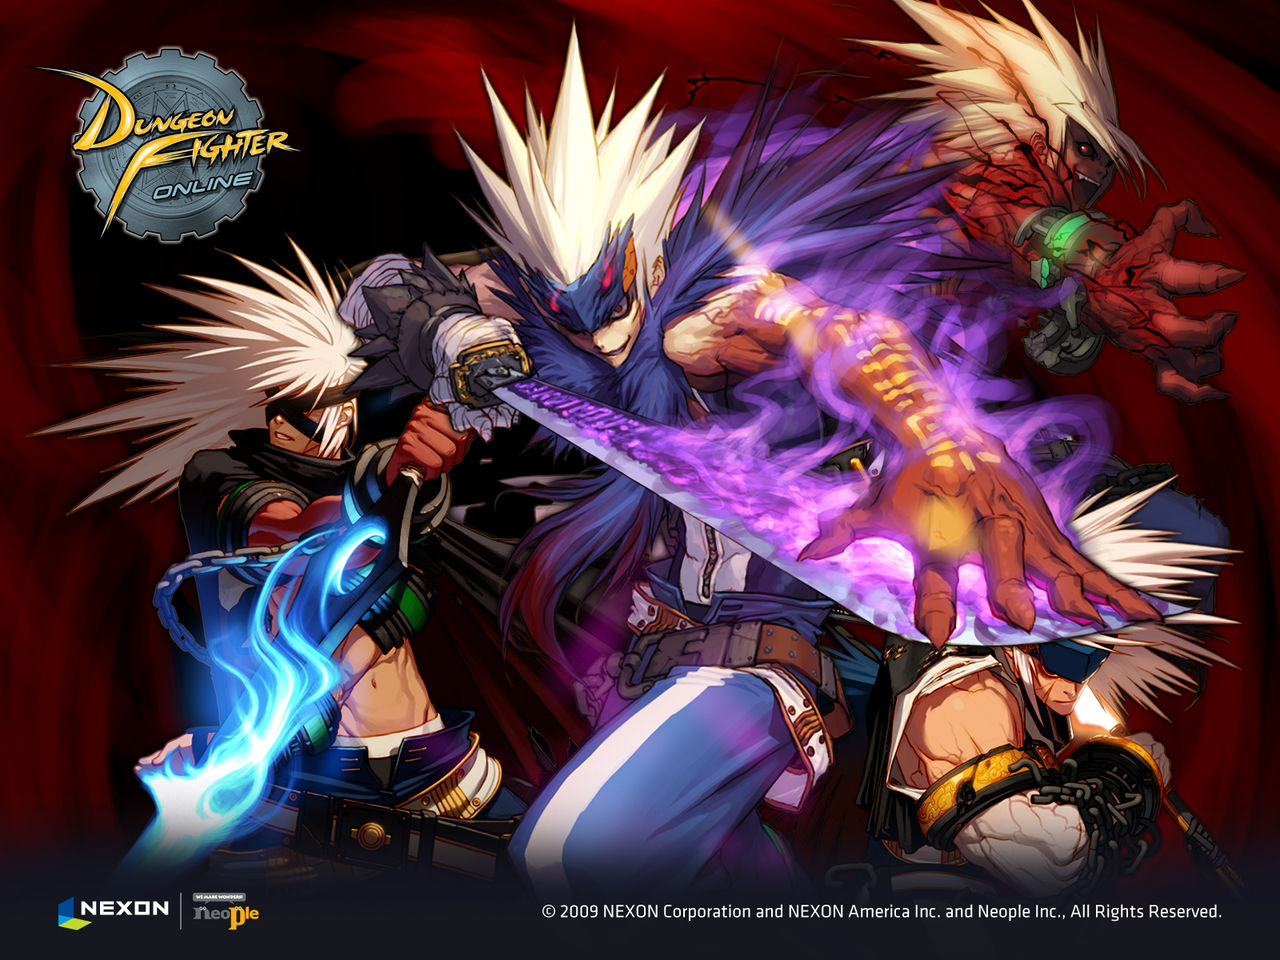 dnf fighting game download